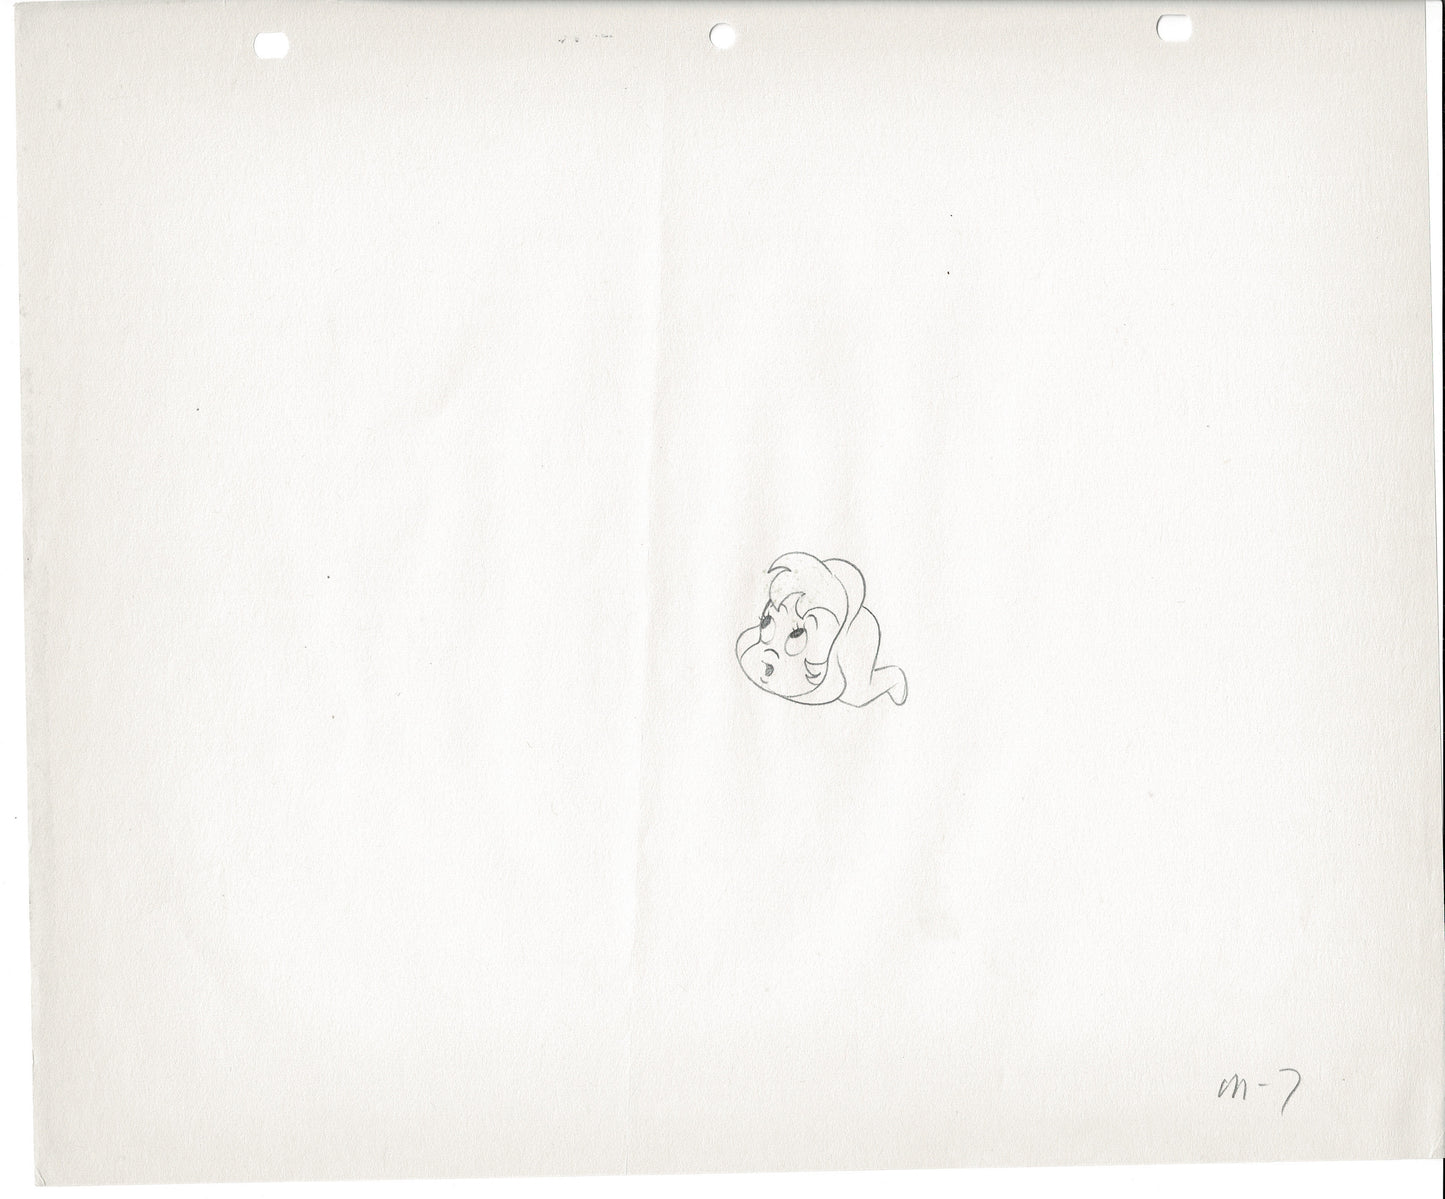 Casper the Friendly Ghost Wendy the Good Little Witch Cartoon Animation Production Cel and Drawing from 1963 Harvey m7